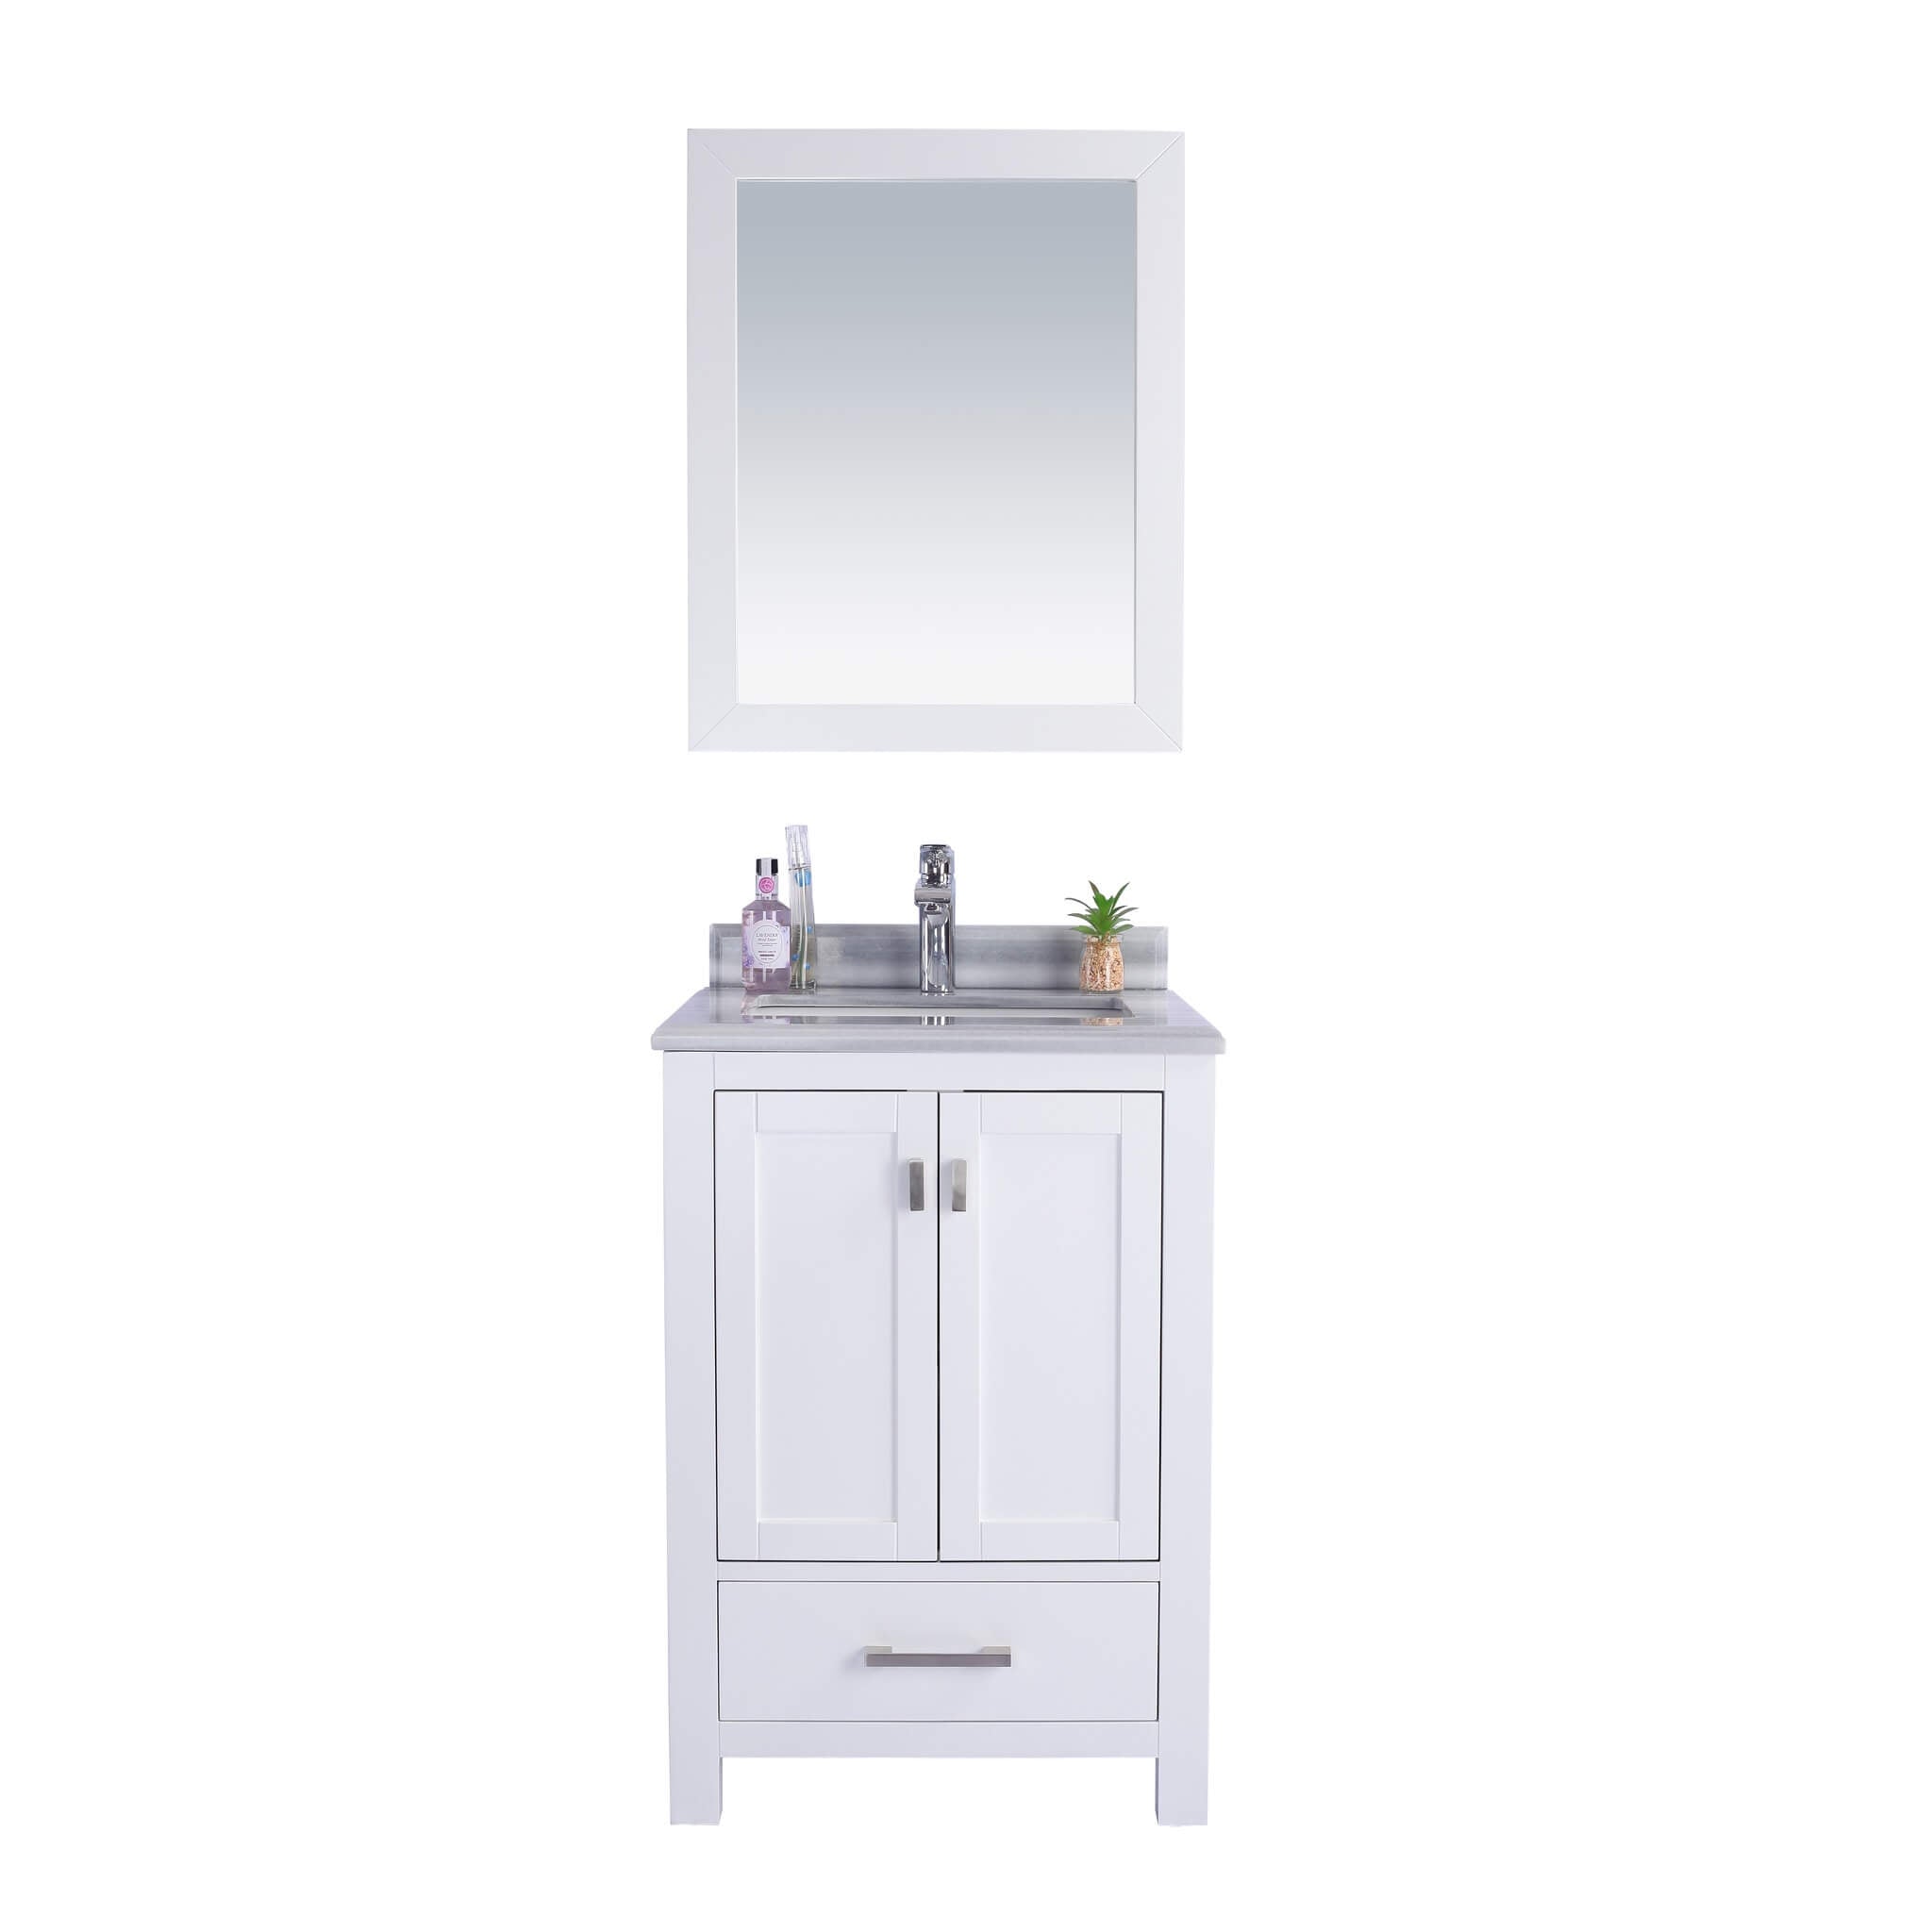 LAVIVA Wilson 313ANG-24W-WS 24" Single Bathroom Vanity in White with White Stripes Marble, White Rectangle Sink, Front View